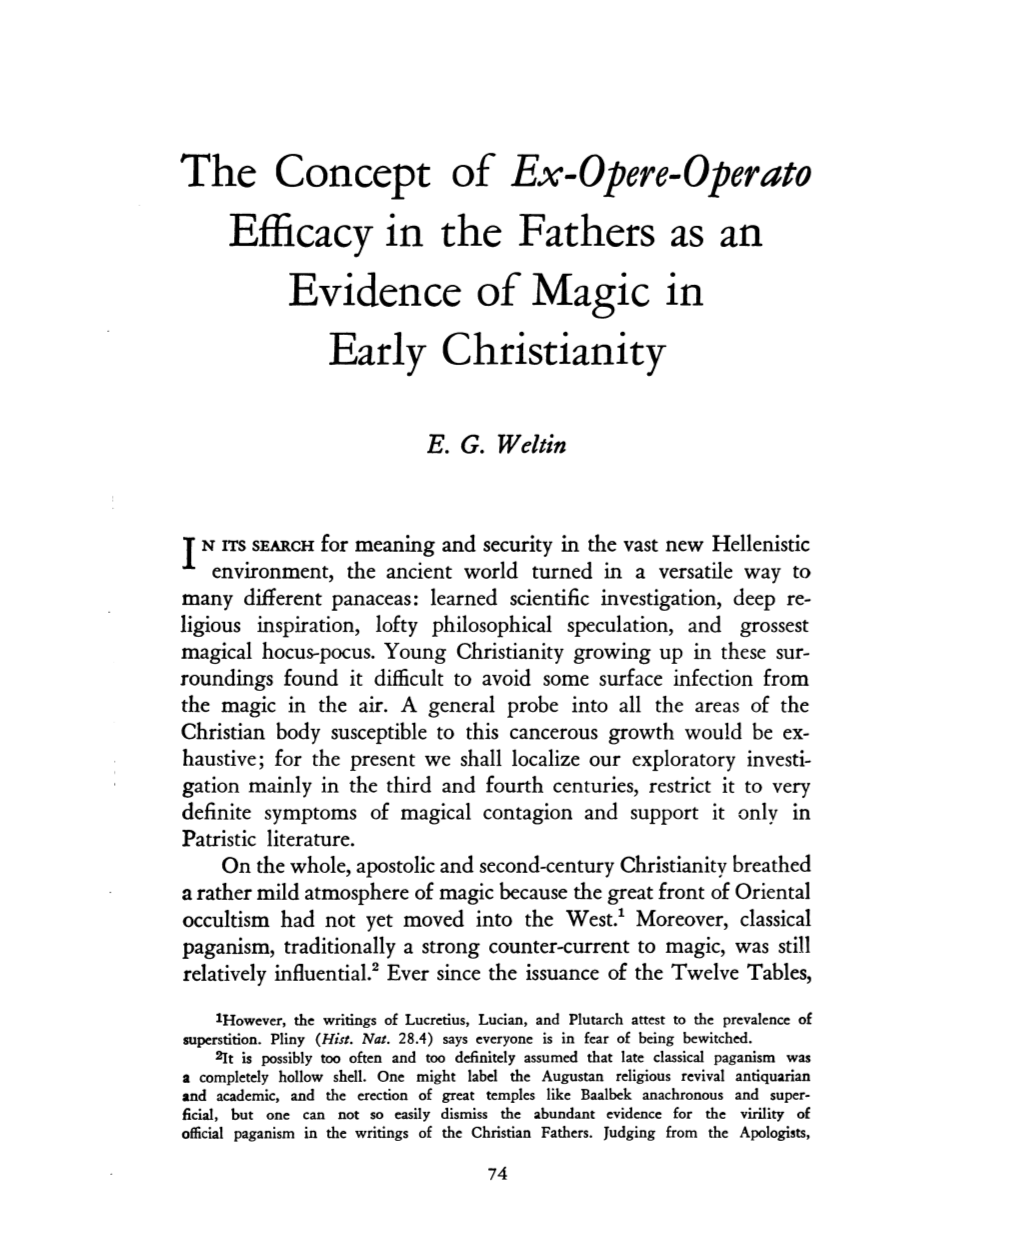 The Concept of Ex-Opere-Operato Efficacy in the Fathers As an Evidence of Magic in Early Christianity